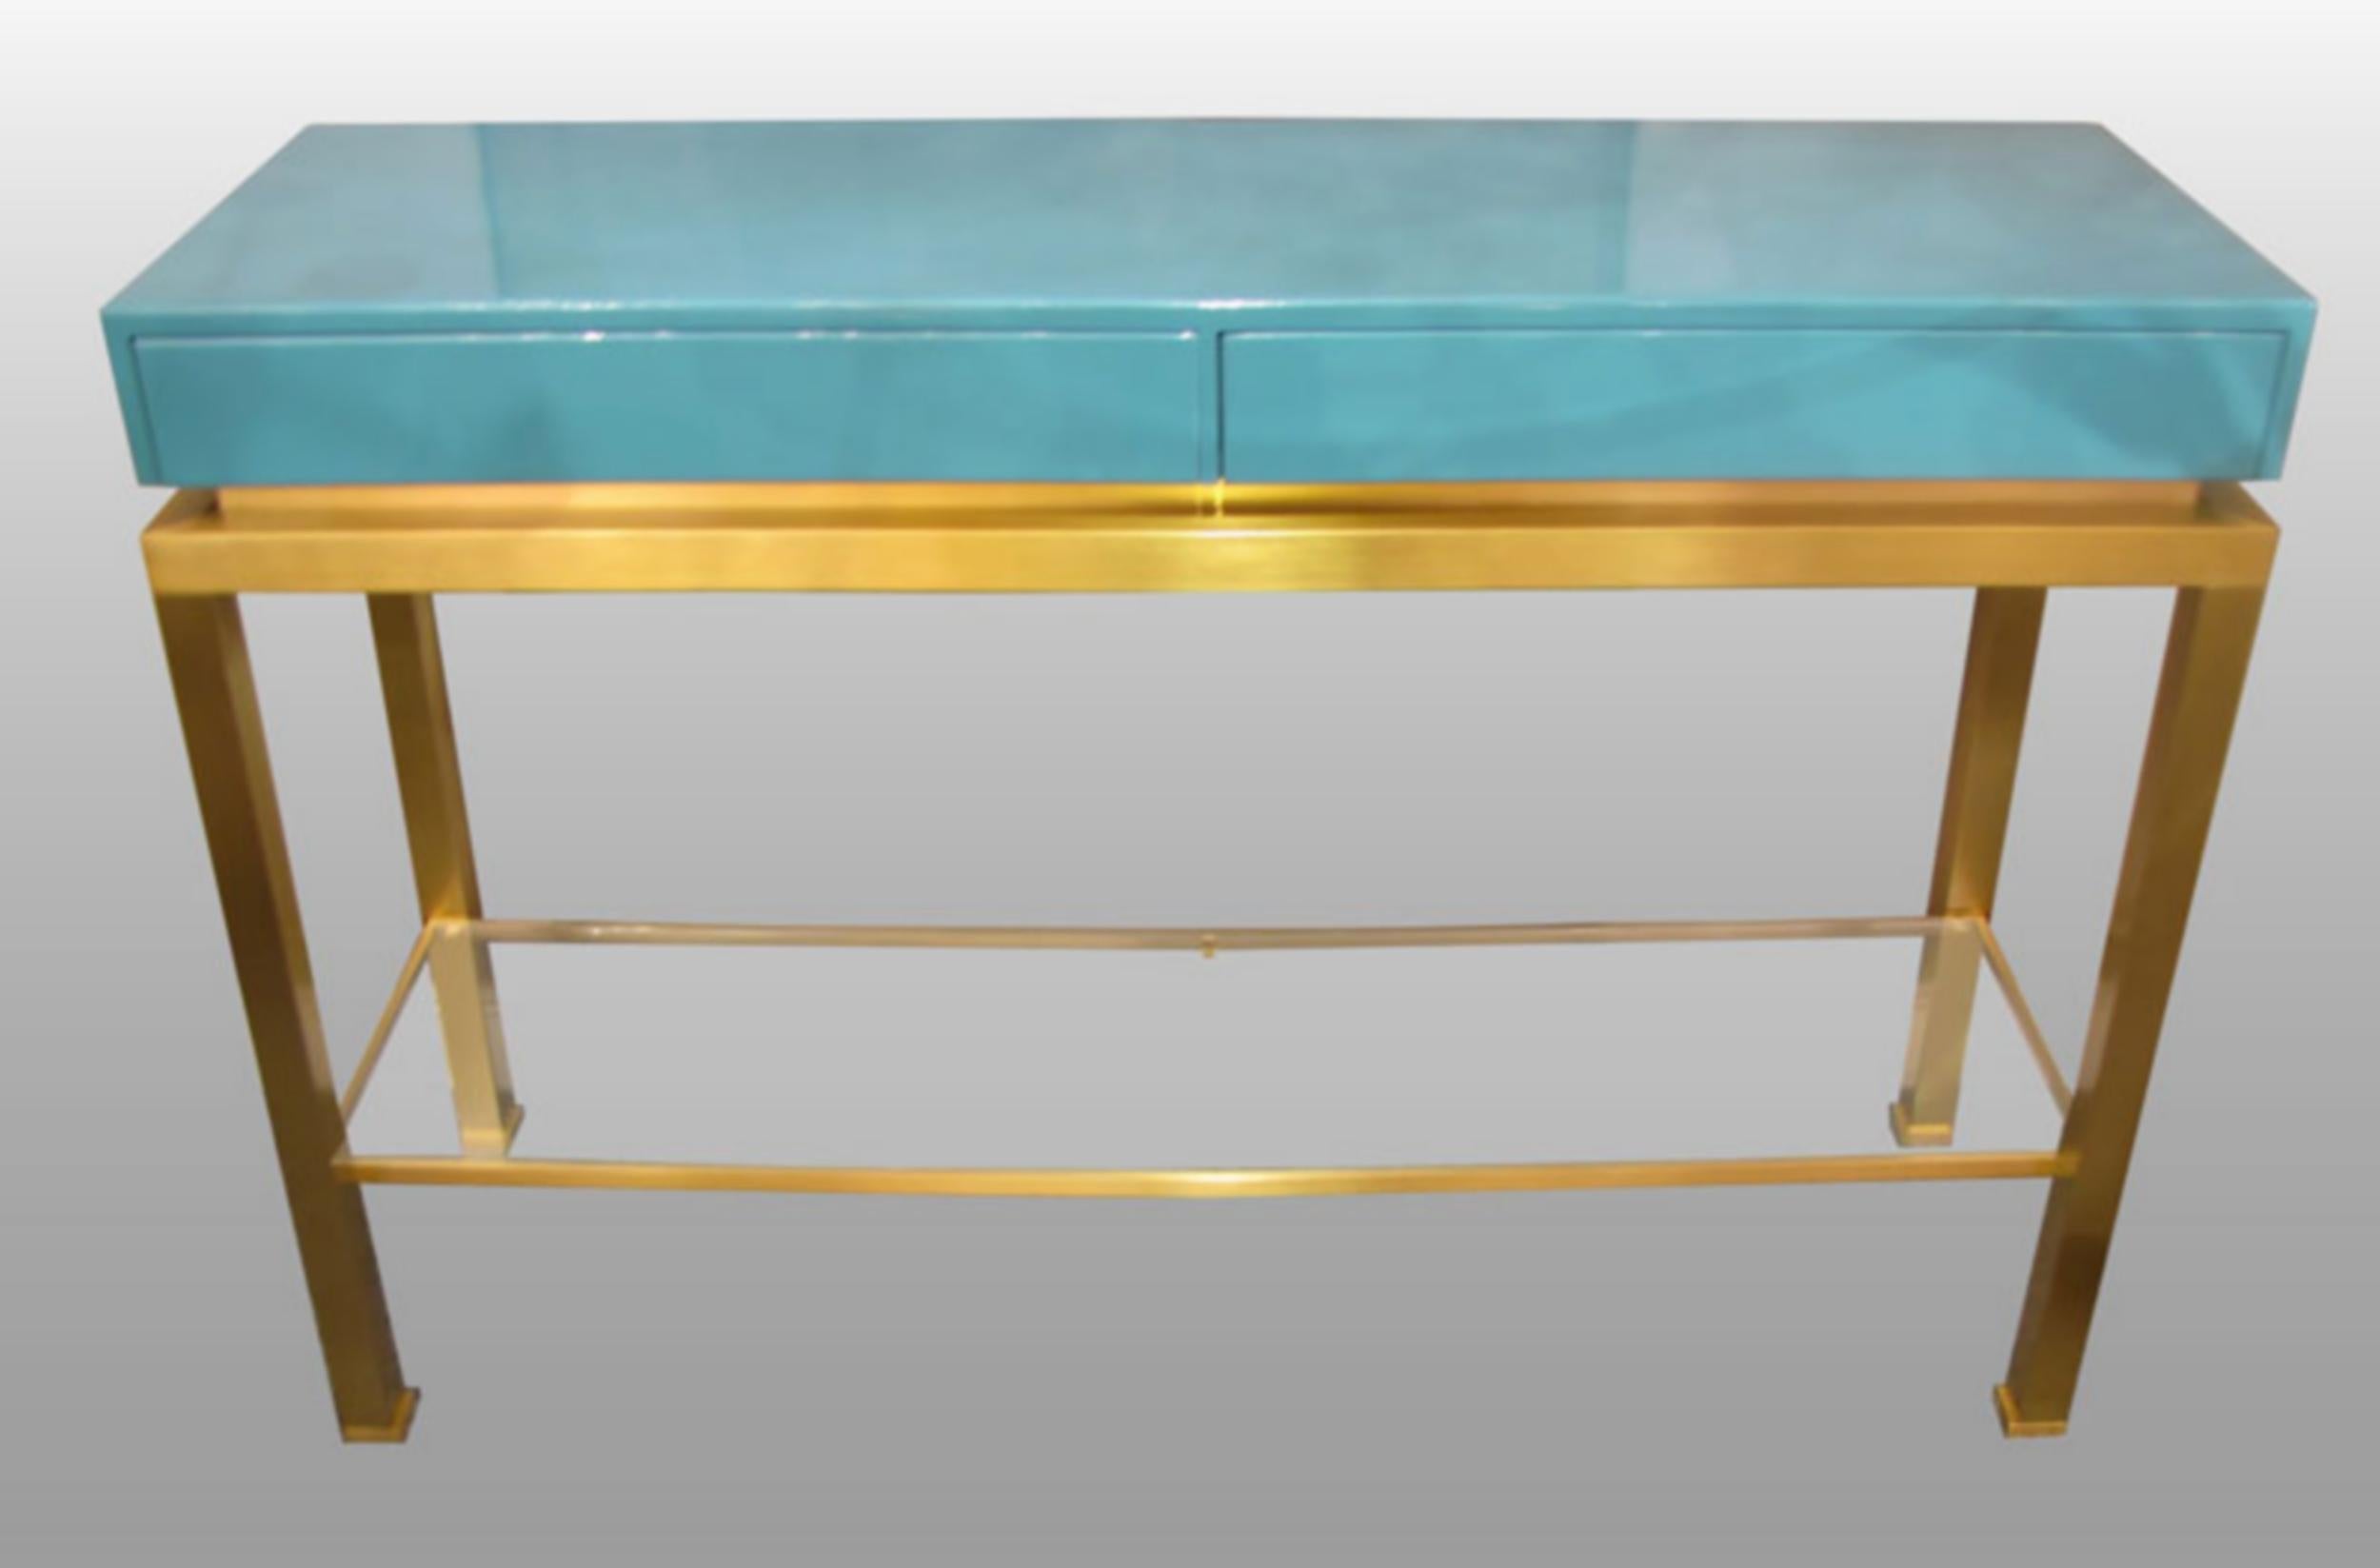 Console in brushed brass and turquoise-blue lacquer, two-drawer pedestal front, lower shelf in clear glass.
Guy Lefevre for Maison Jansen, circa 1970.
Cabinet and drawer interiors in mat varnished Sapelli mahogany.

Biography

Guy Lefèvre is a